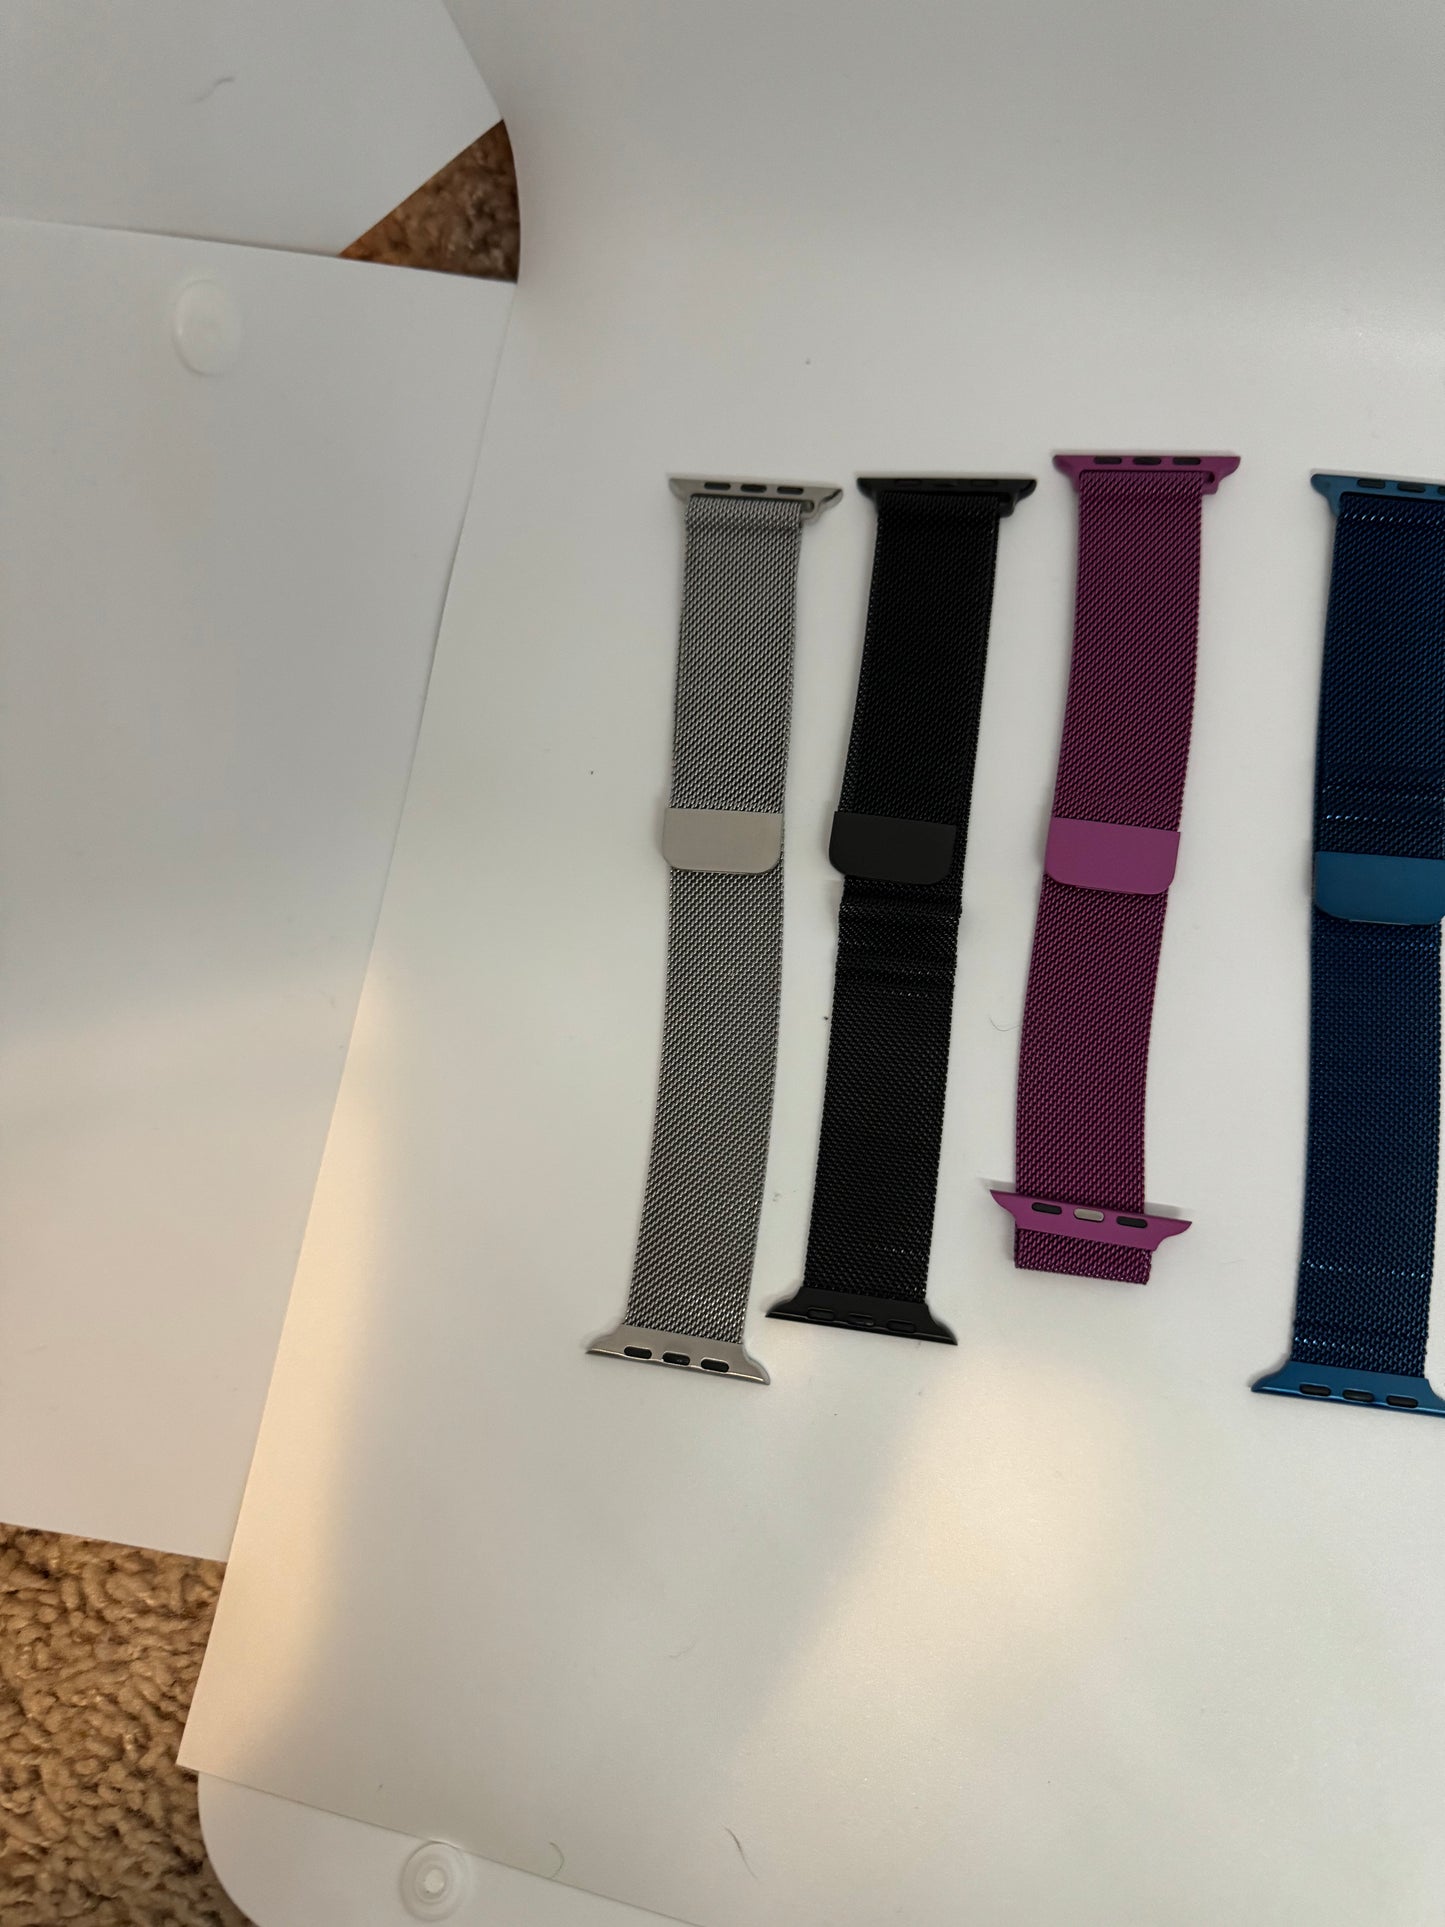 The picture shows four watch bands laid out on a white surface. From left to right, the first band is silver with a metallic mesh texture. The second band is black and appears to have a smooth texture. The third band is a vibrant pink color with a similar texture to the black band. The fourth band is blue with a slightly darker shade at the bottom. The bands have attachments at the ends, likely for connecting to a watch face. The background has a white surface with a small portion of a beige carpe